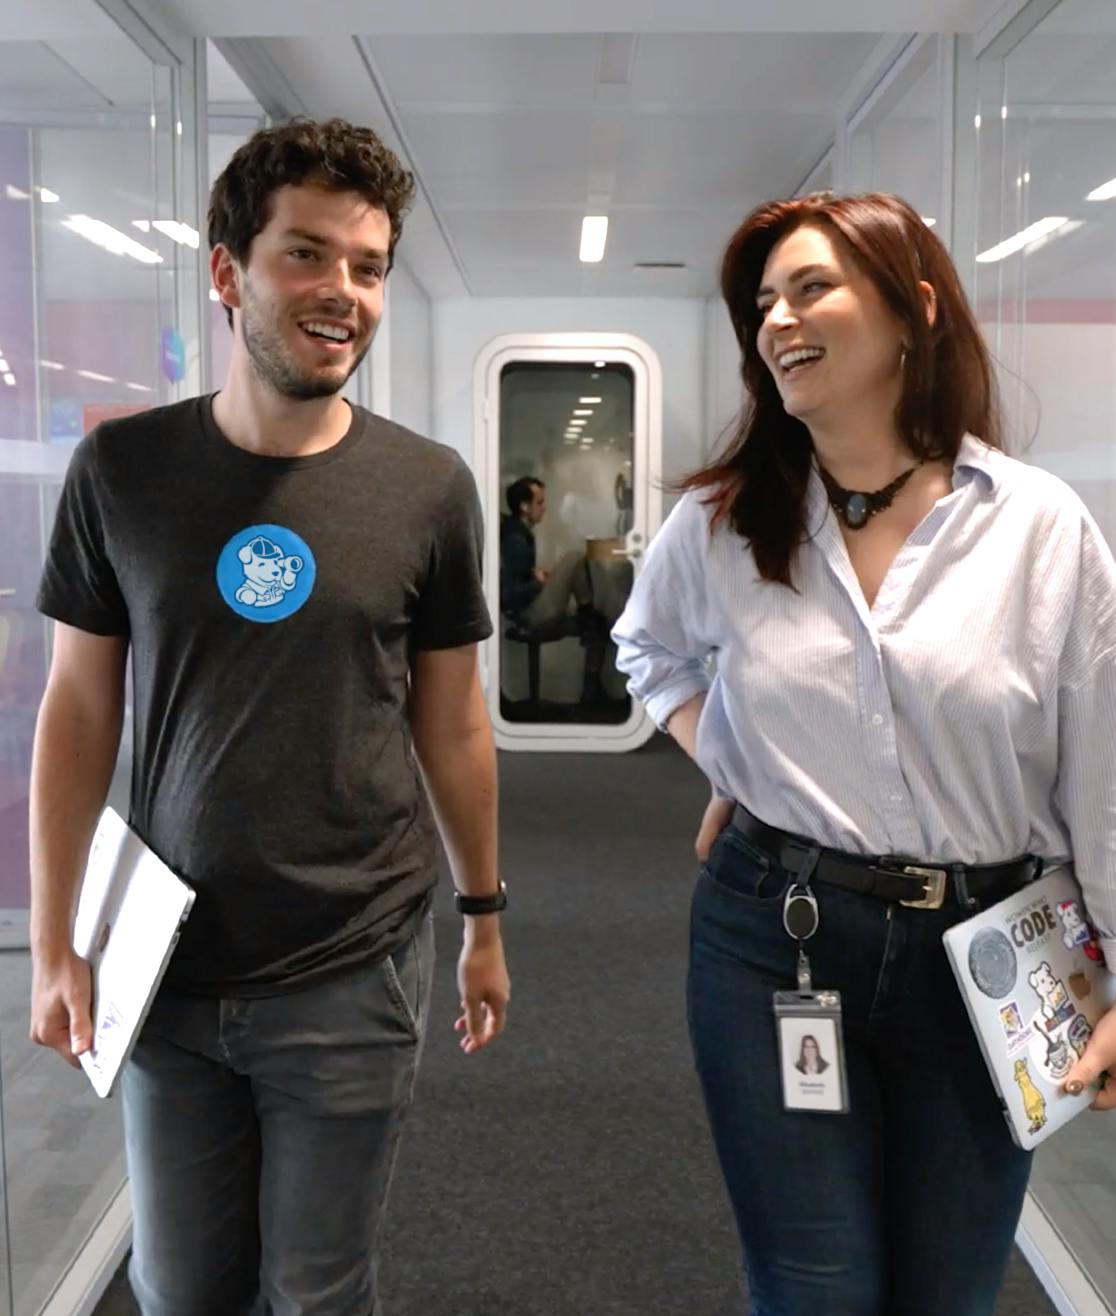 A thumbnail image taken from a Datadog recruiting video; Two colleagues dressed in casual attire and walking by conference rooms in a Datadog office.